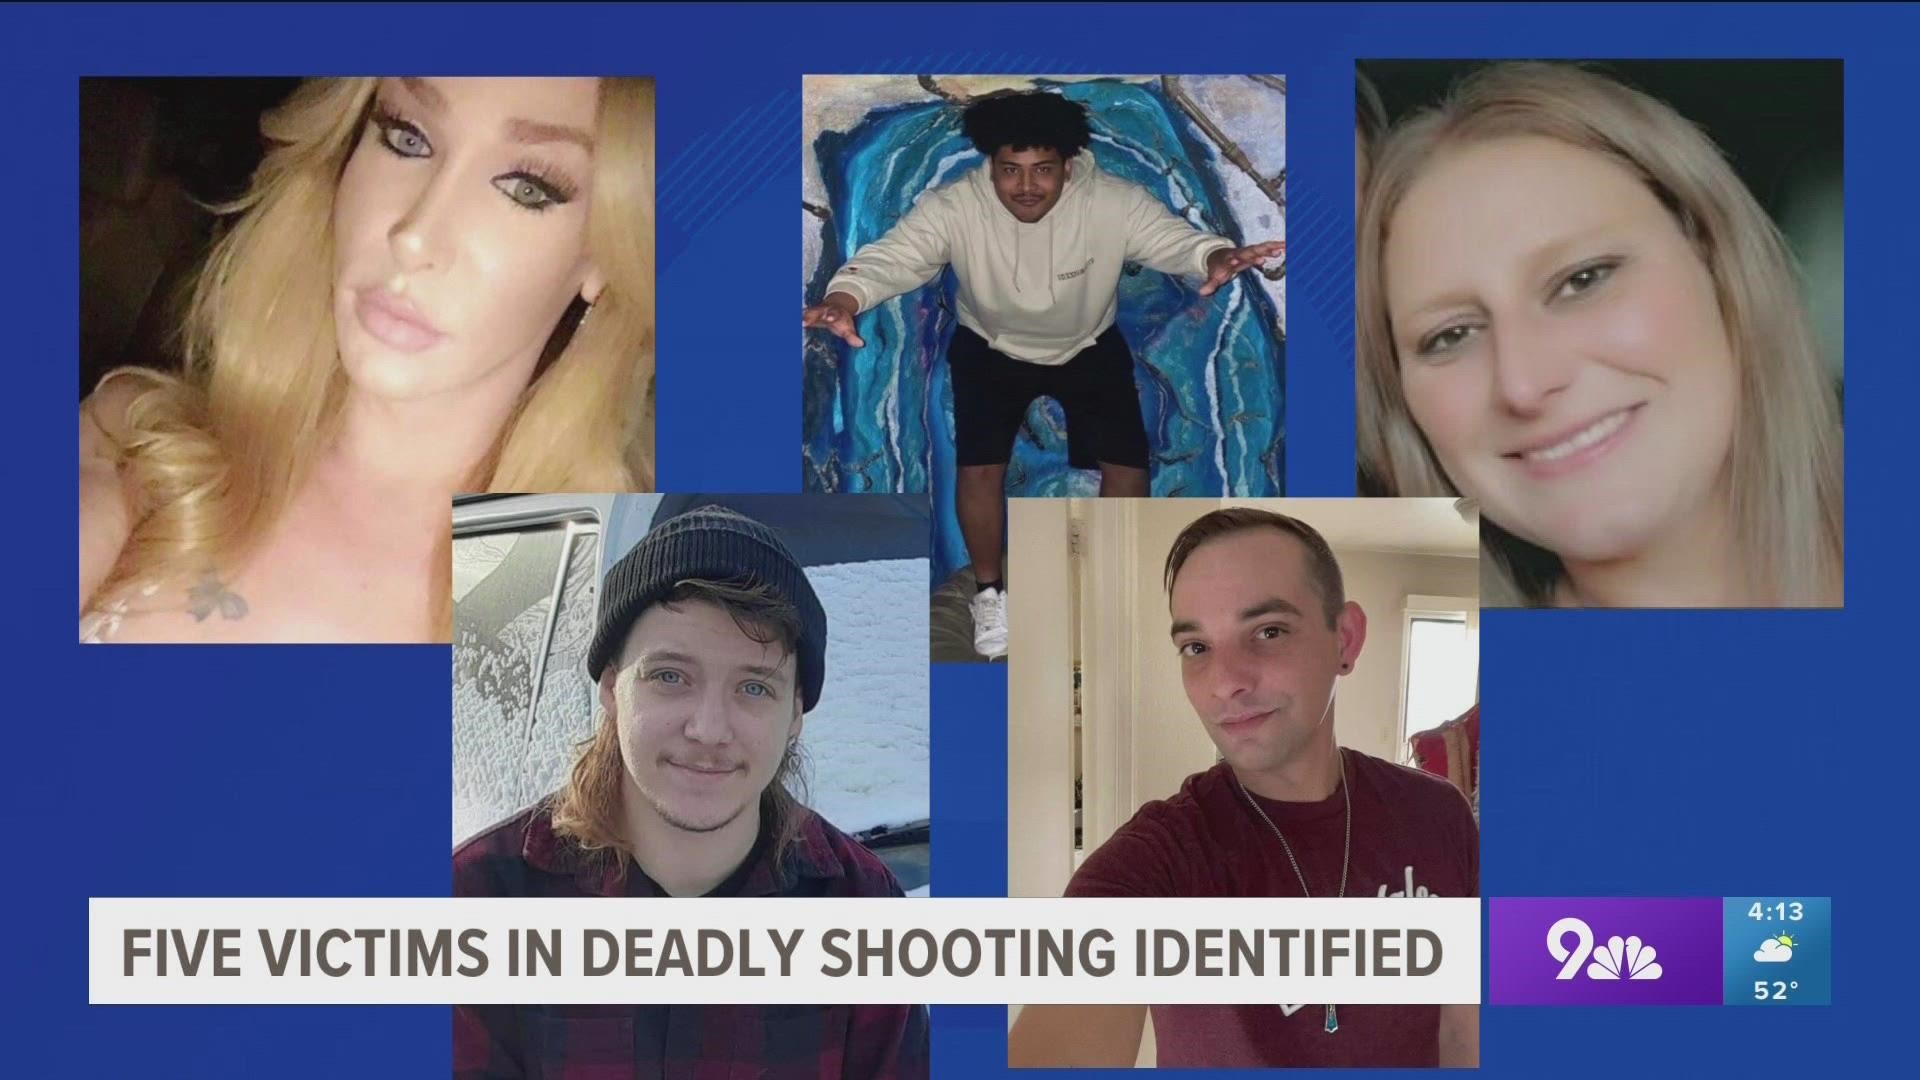 Colorado Springs Police Department identified the following as the victims who died: Daniel Aston, Kelly Loving, Ashley Paugh, Derrick Rum and Raymond Green Vance.